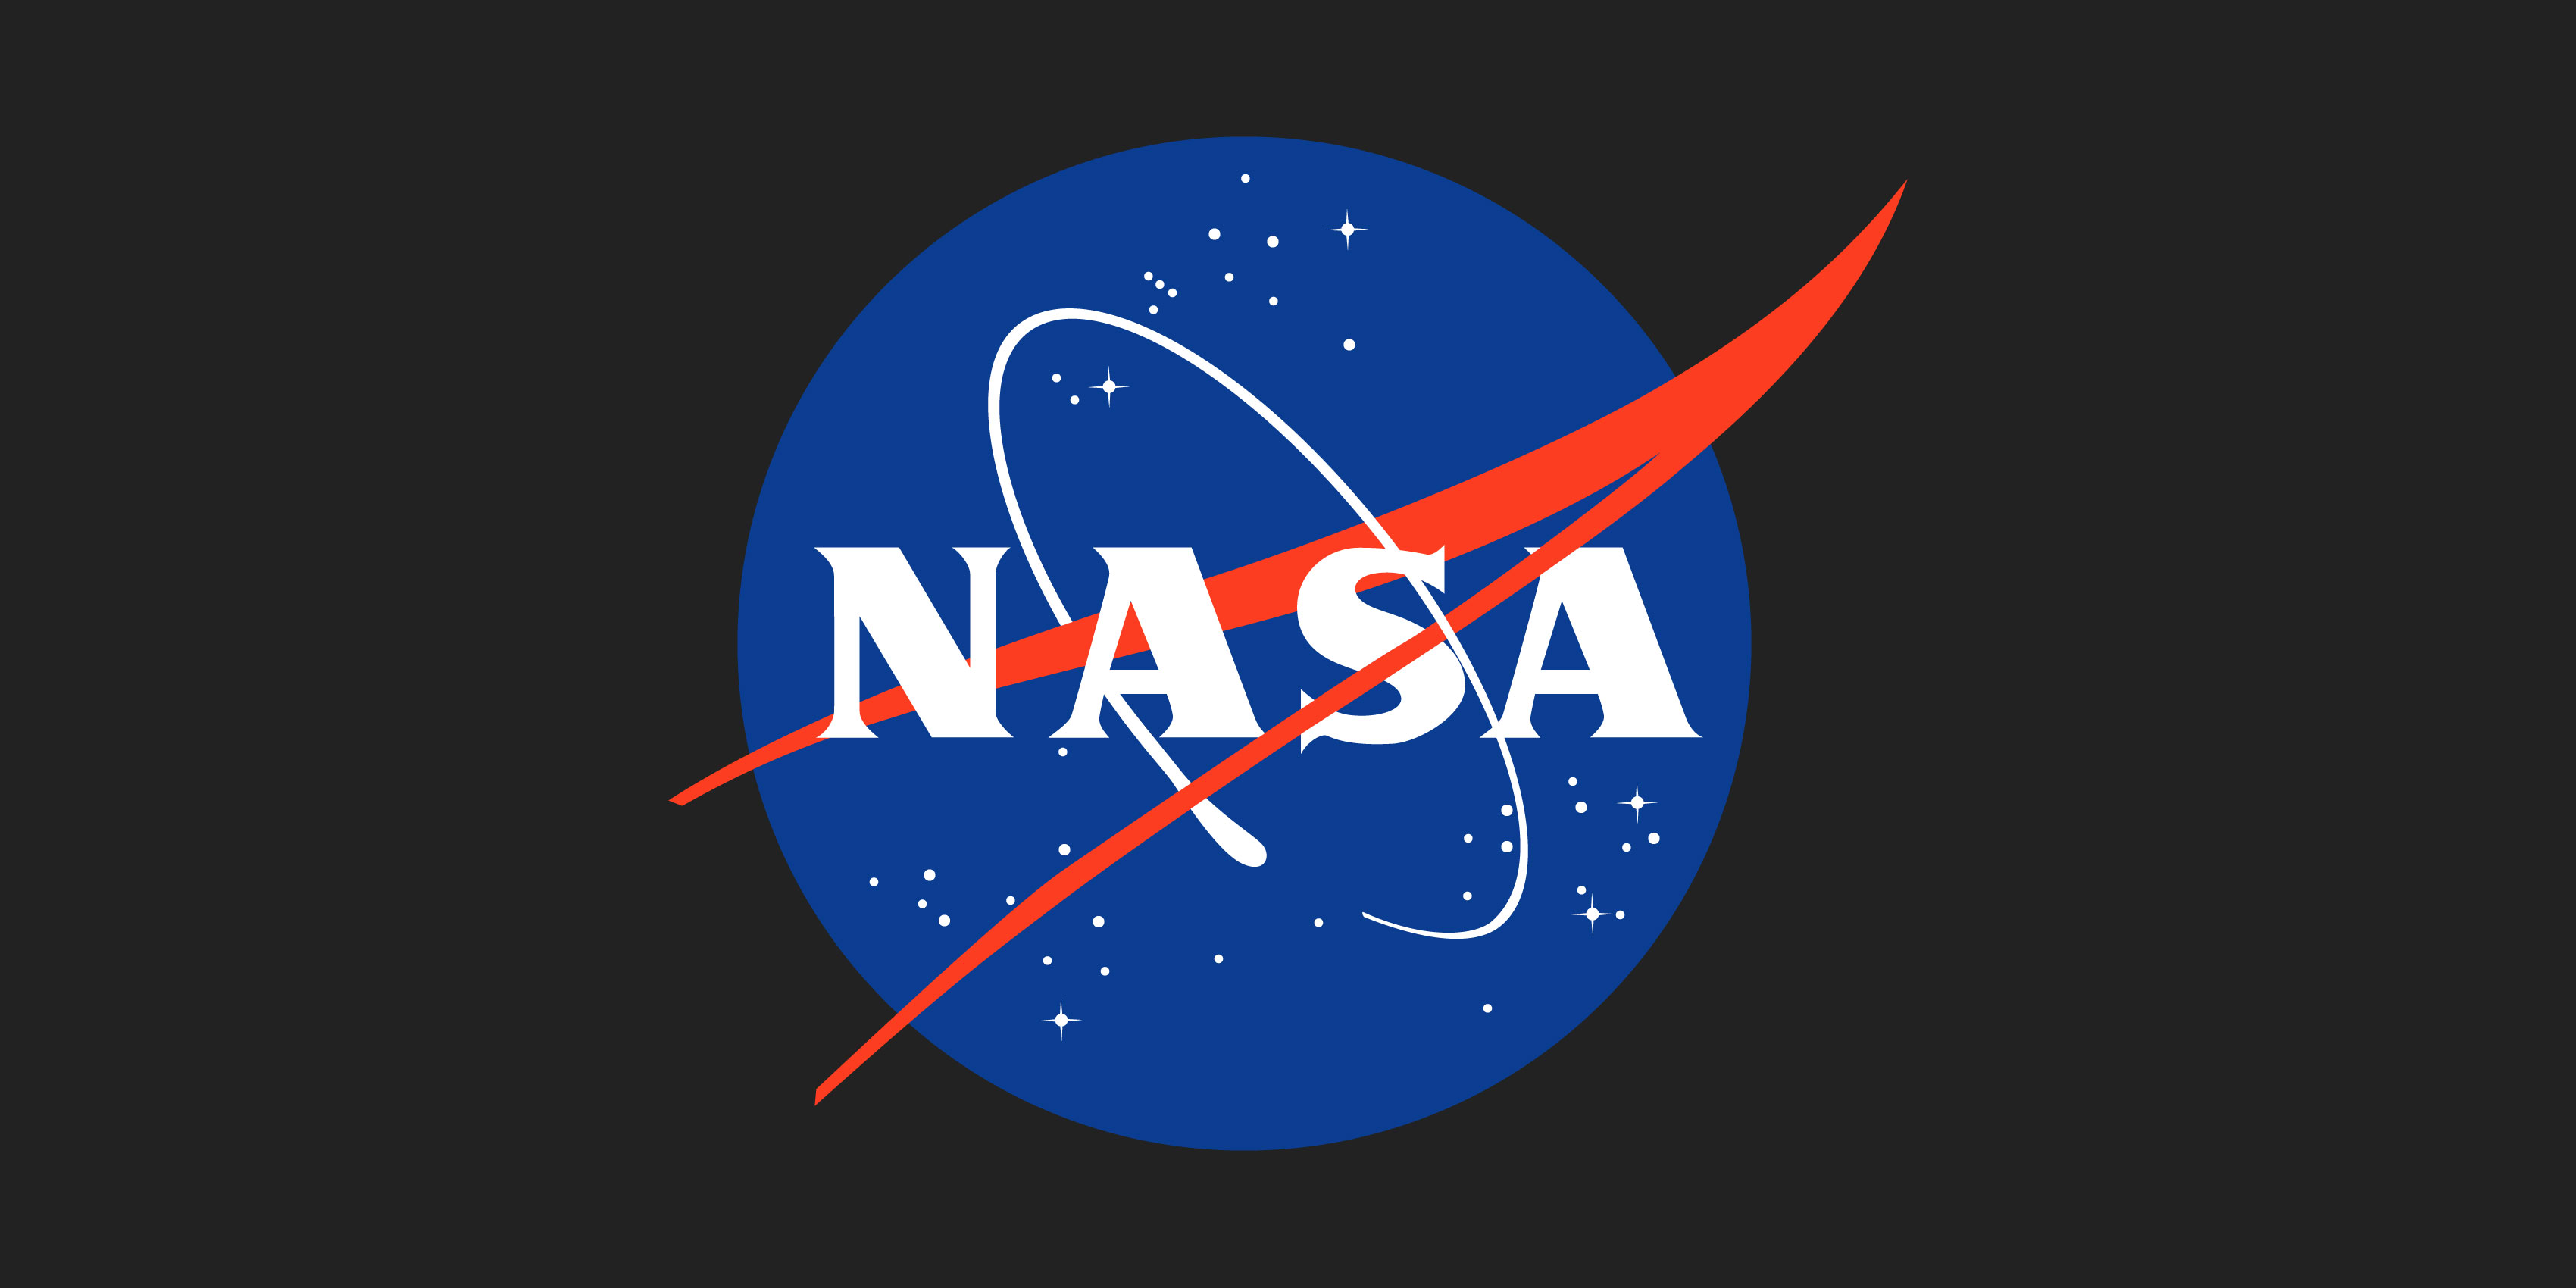 Open Call to New York-based Artists to Create Collaborative NASA Mural